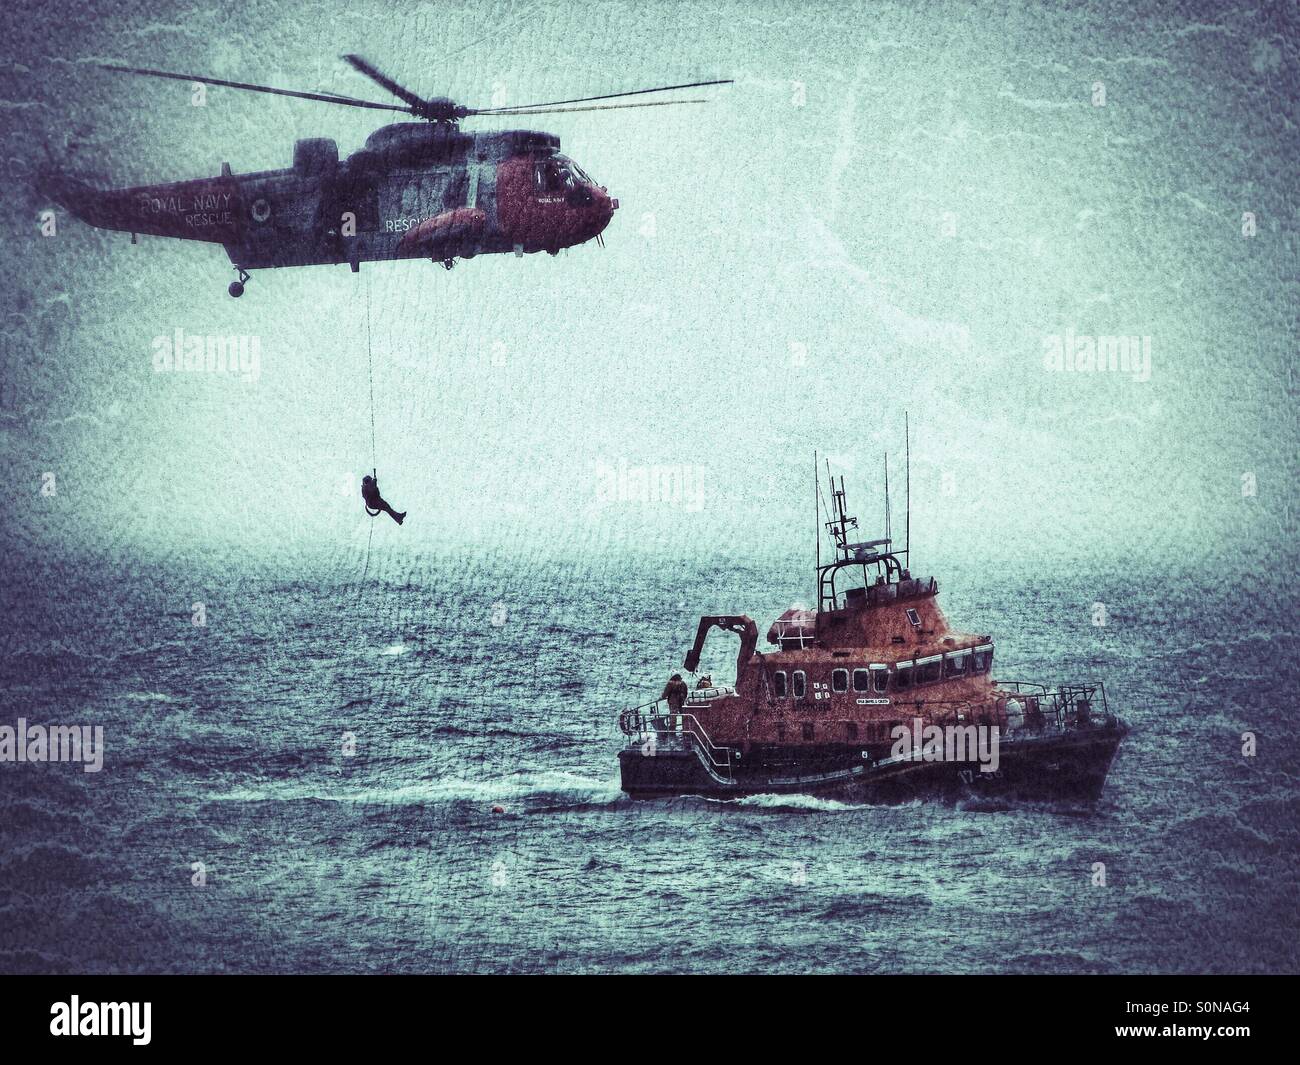 A Royal Navy Merlin Helicopter winches an aircrew member down to a waiting RNLI Lifeboat on a misty sea. Stock Photo